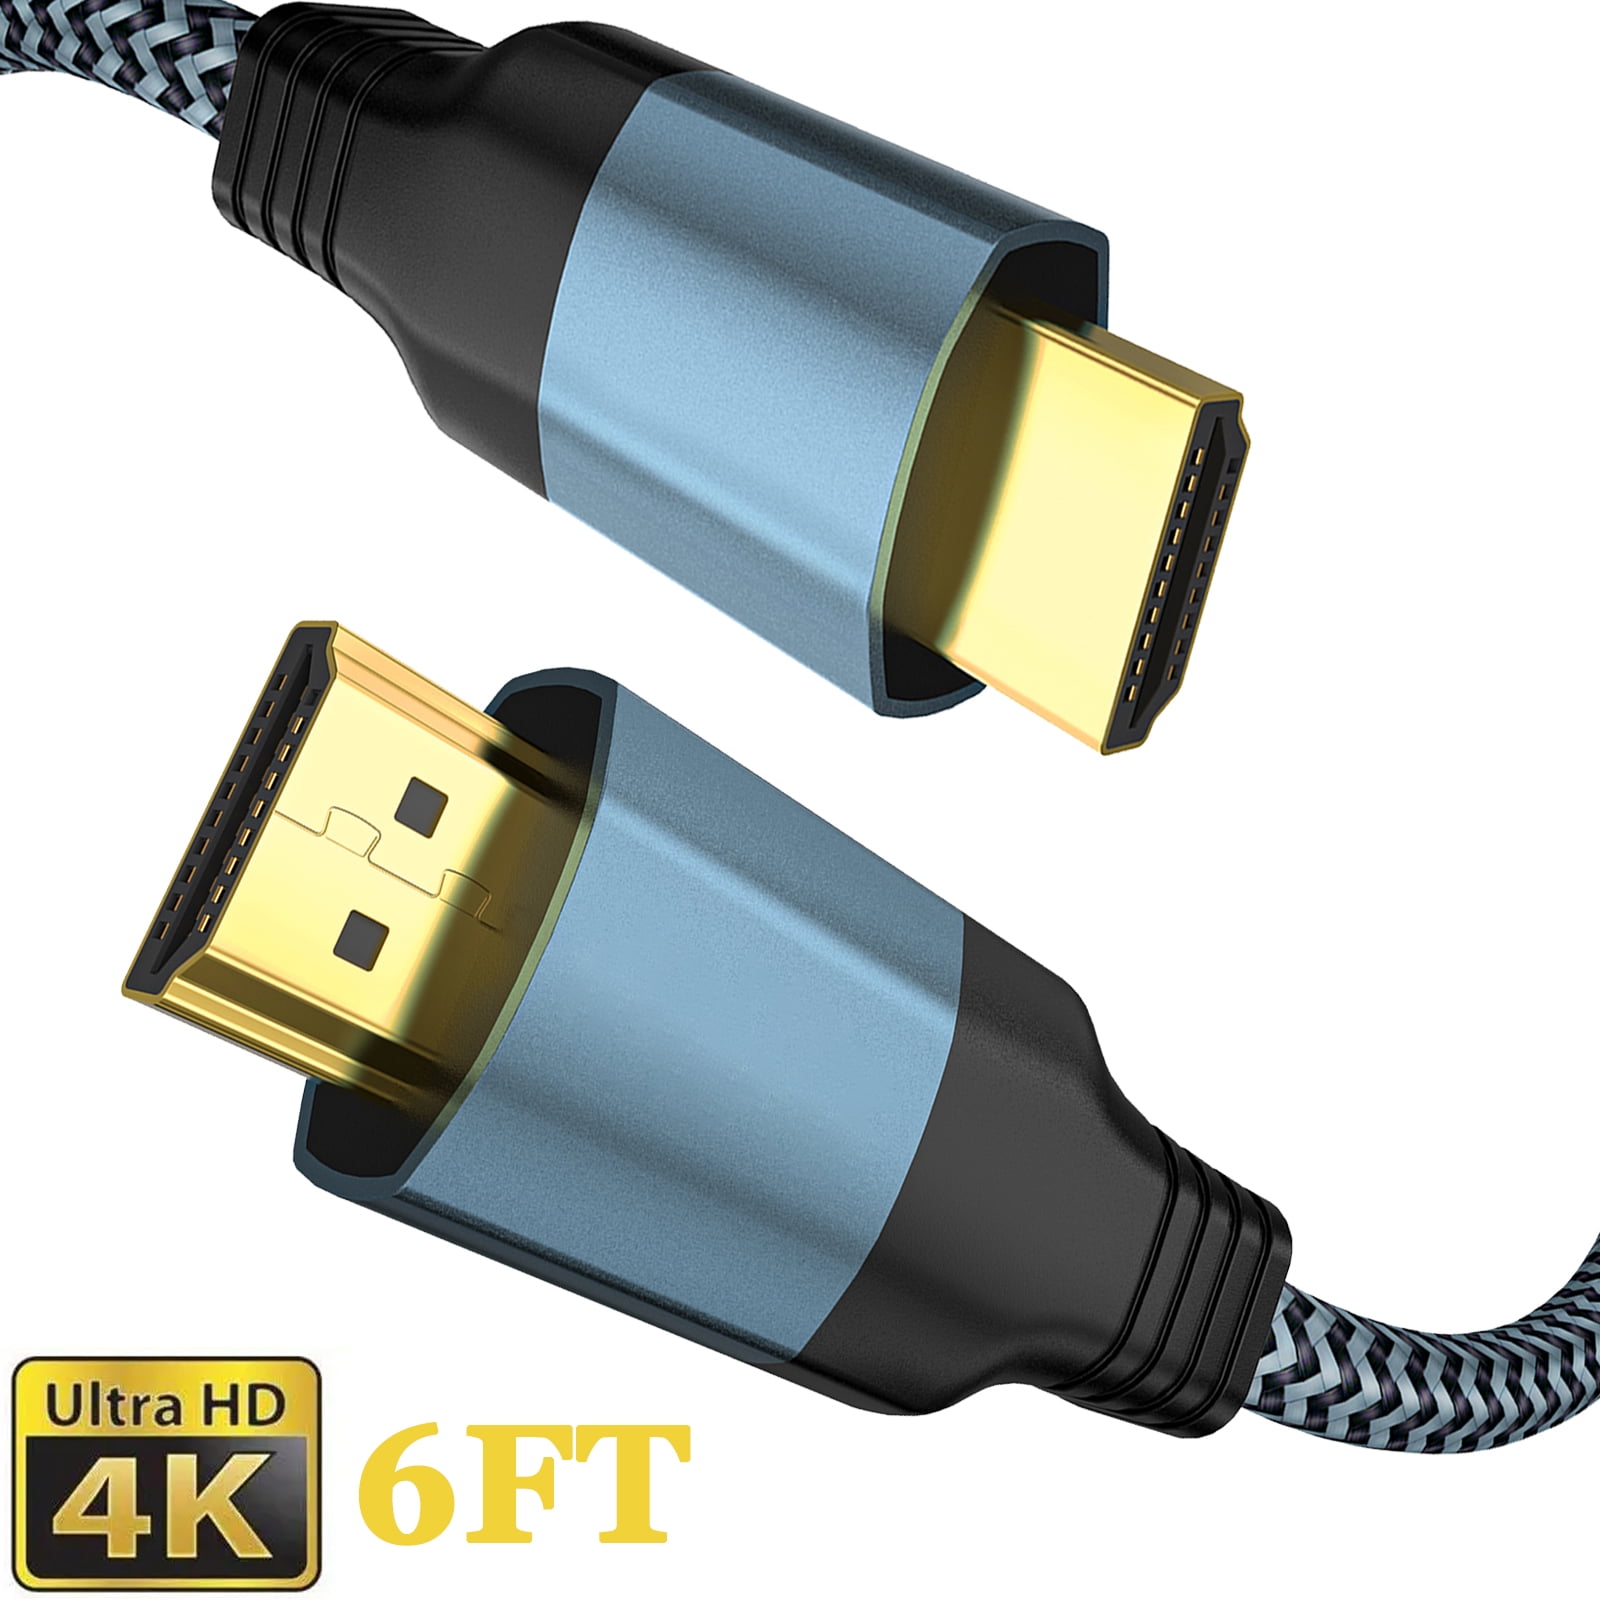 4K HDMI Cable 6ft XUDUO 2.0 High Speed HDMI Cord Nylon Braided, 4K 60Hz HDR,Video 4K 2160p 1080p 3D HDCP 2.2 ARC, for Laptop, PS5, PS4, Xbox One, -